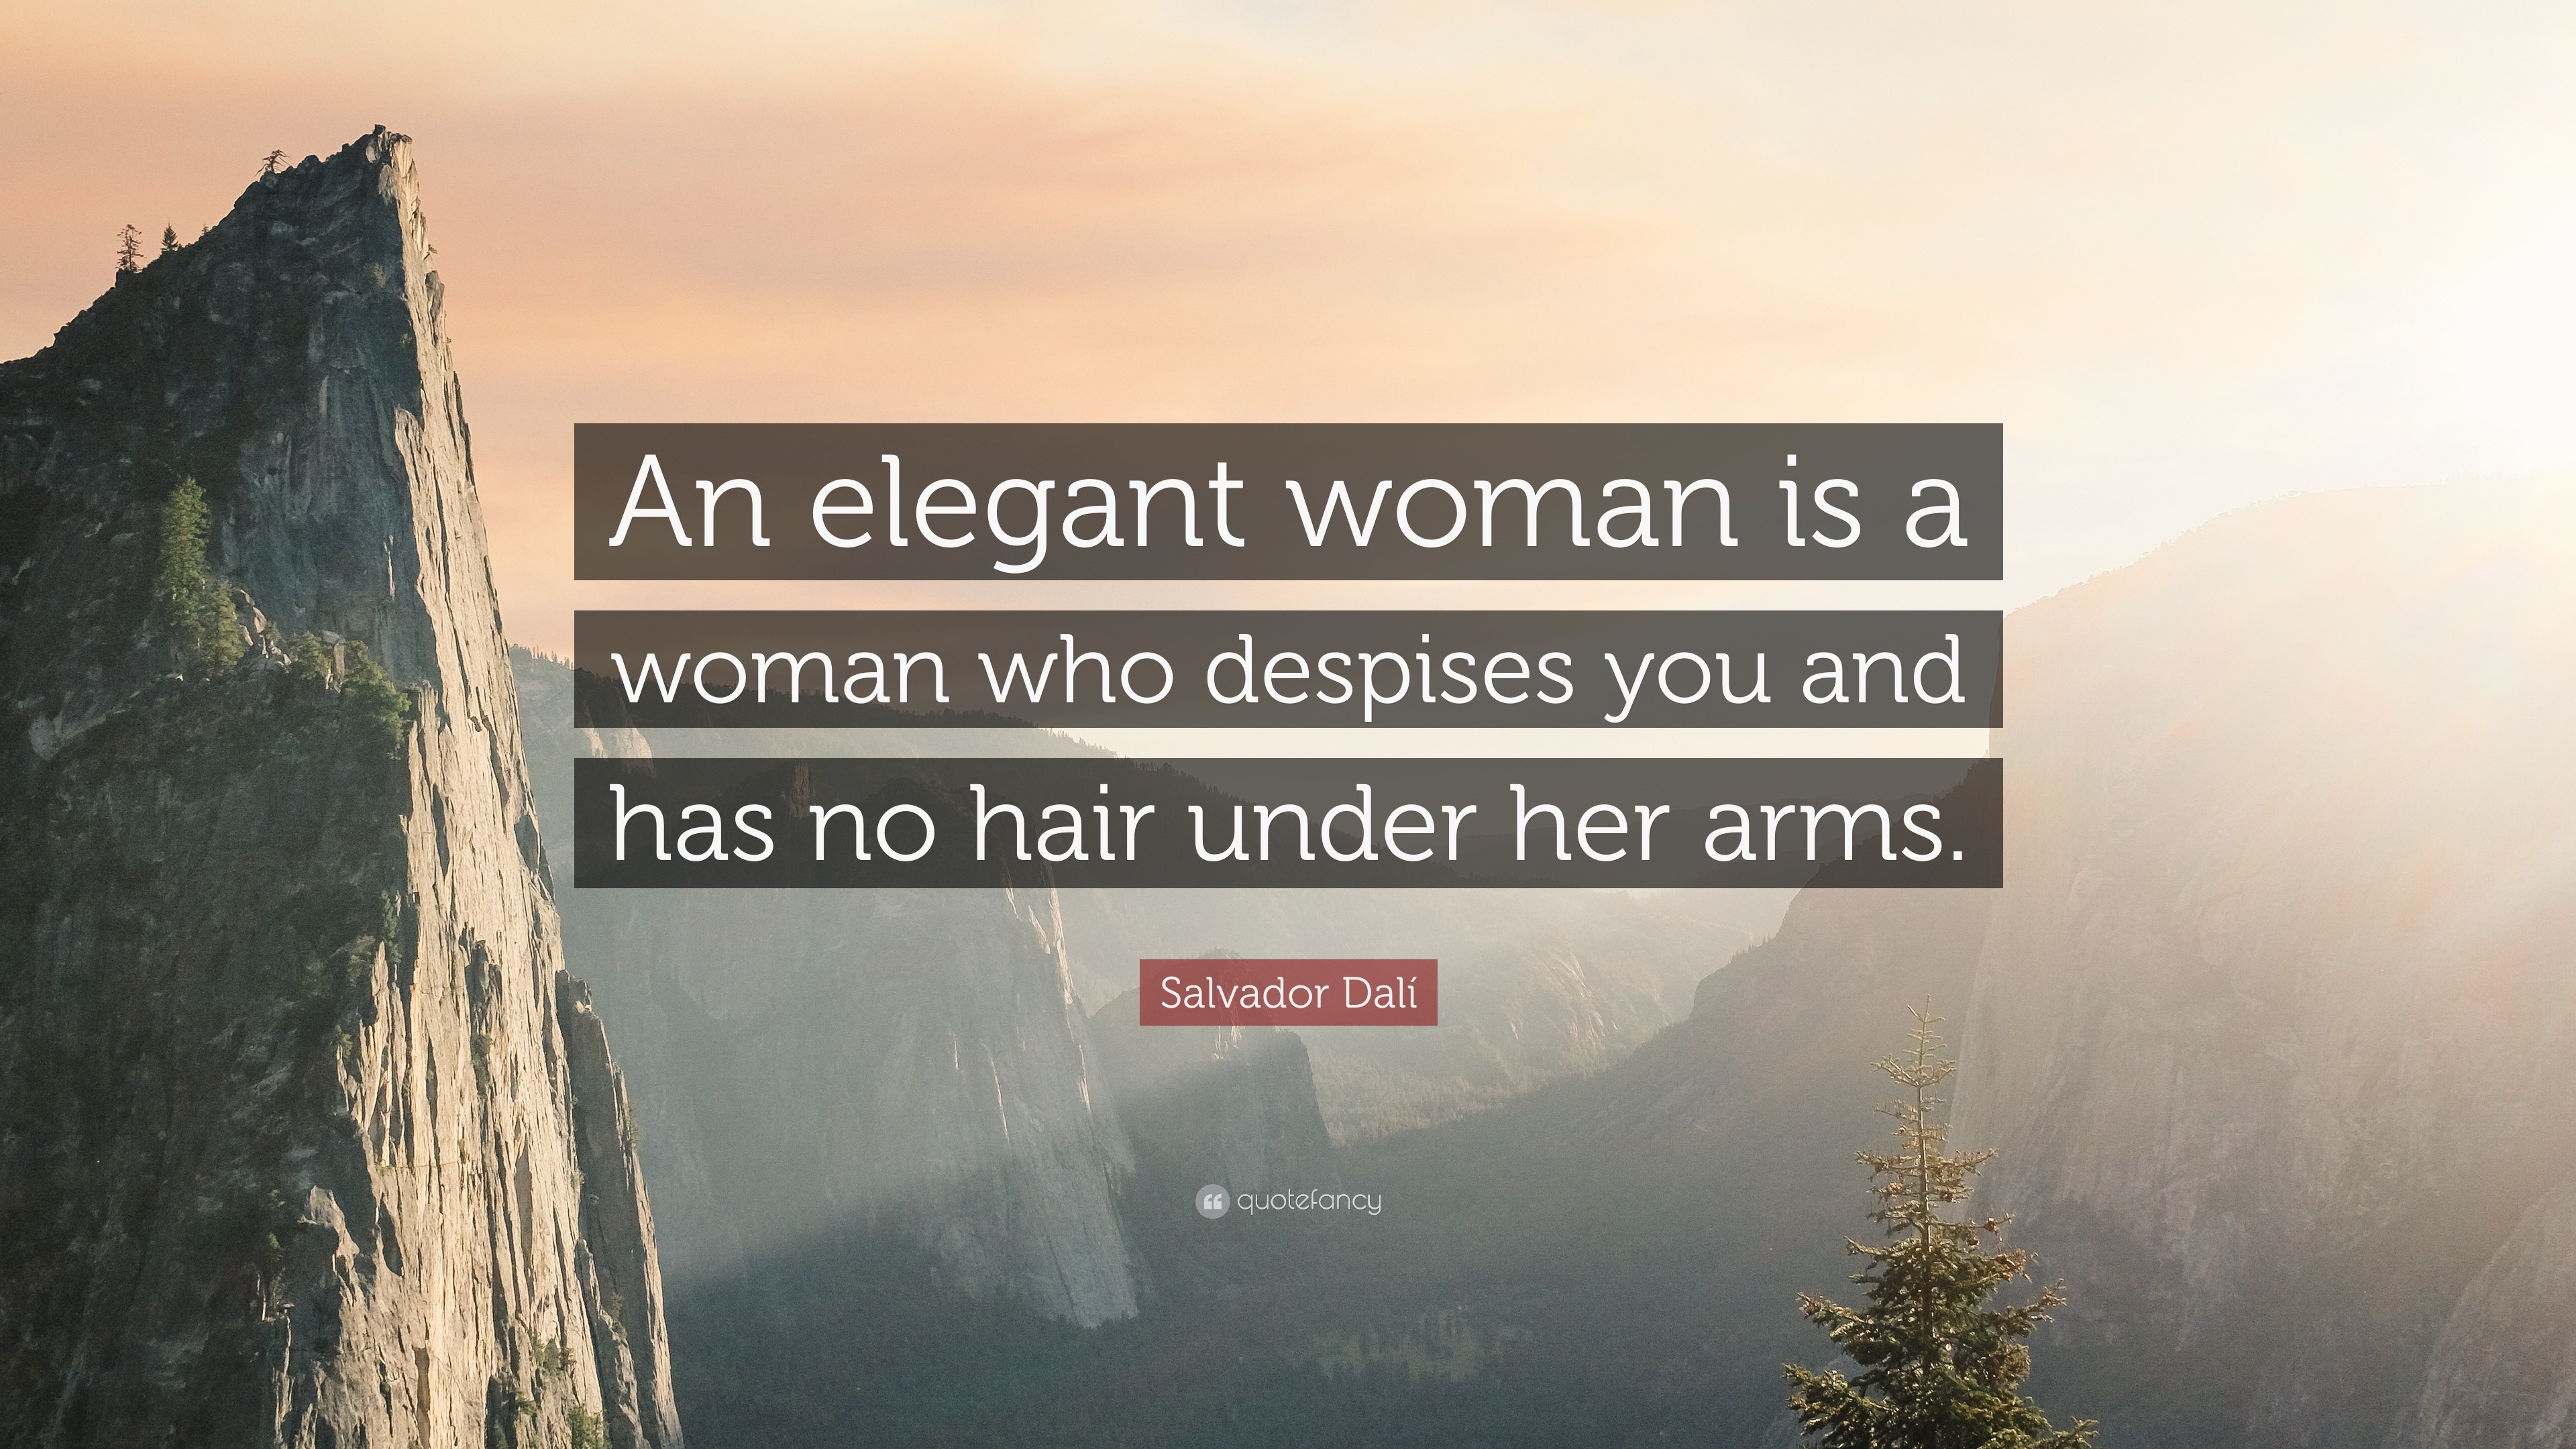 Salvador Dalí Quote: “An elegant woman is a woman who despises you and ...